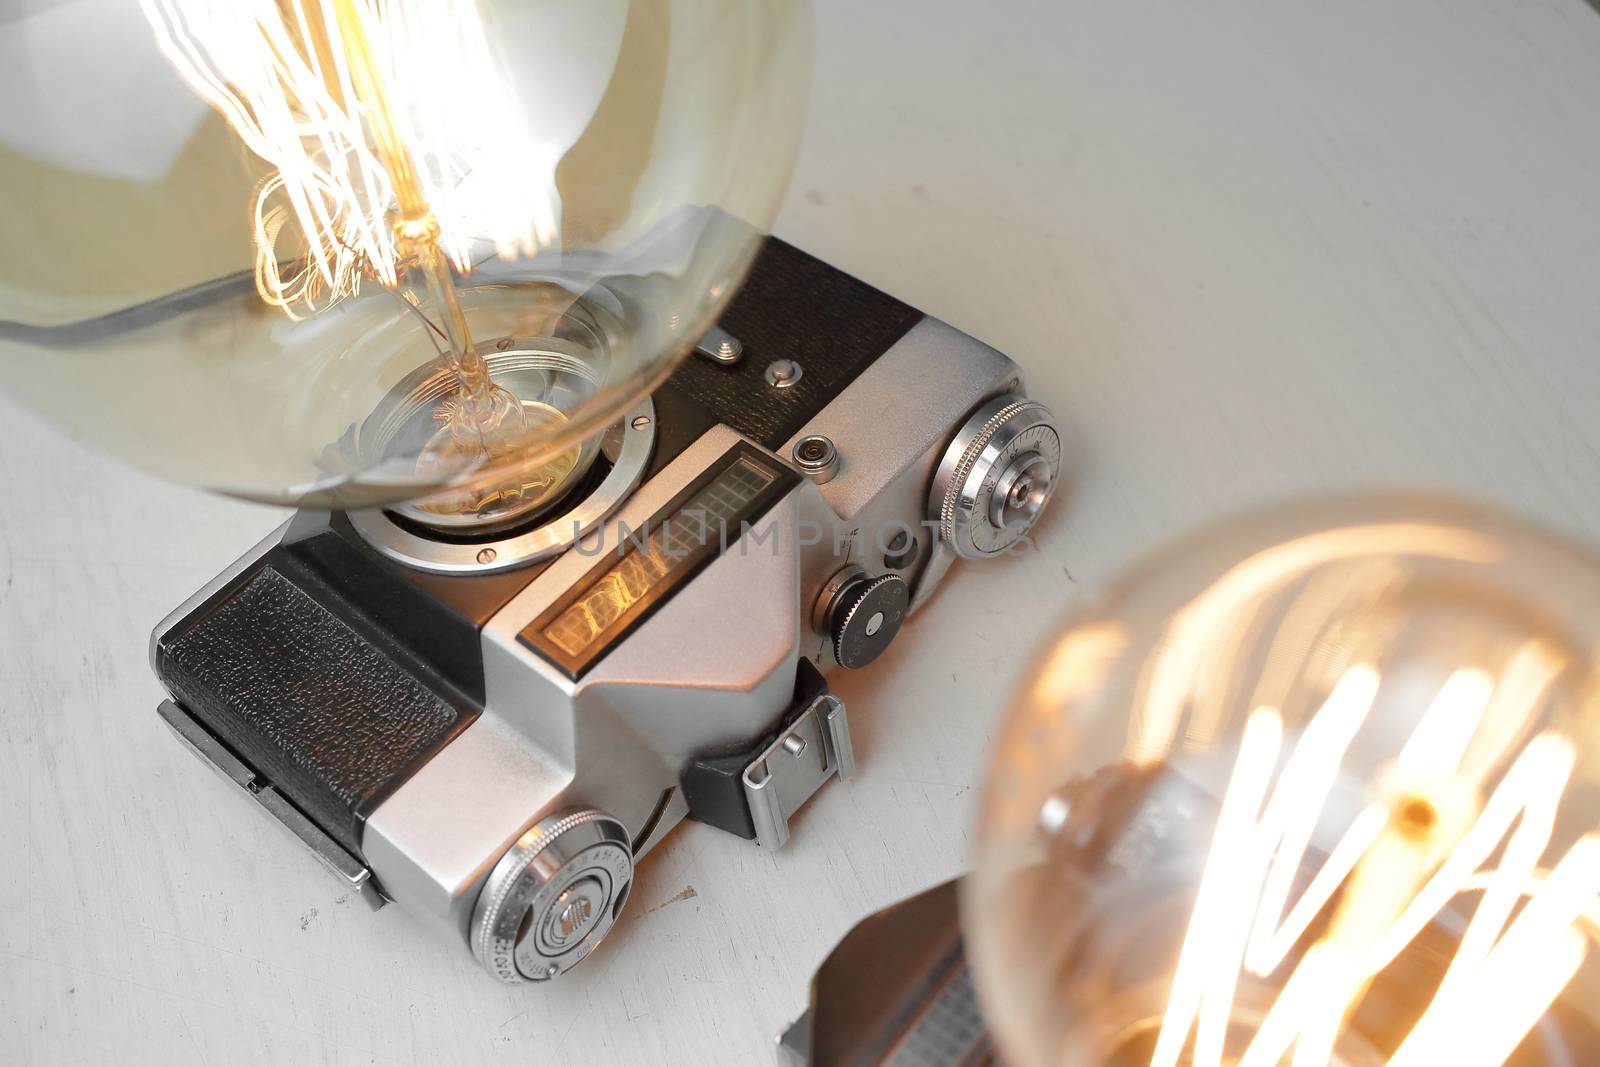 Retro lamp from an old camera with an Edison lamp on a gray background. Concept is a good idea. by selinsmo